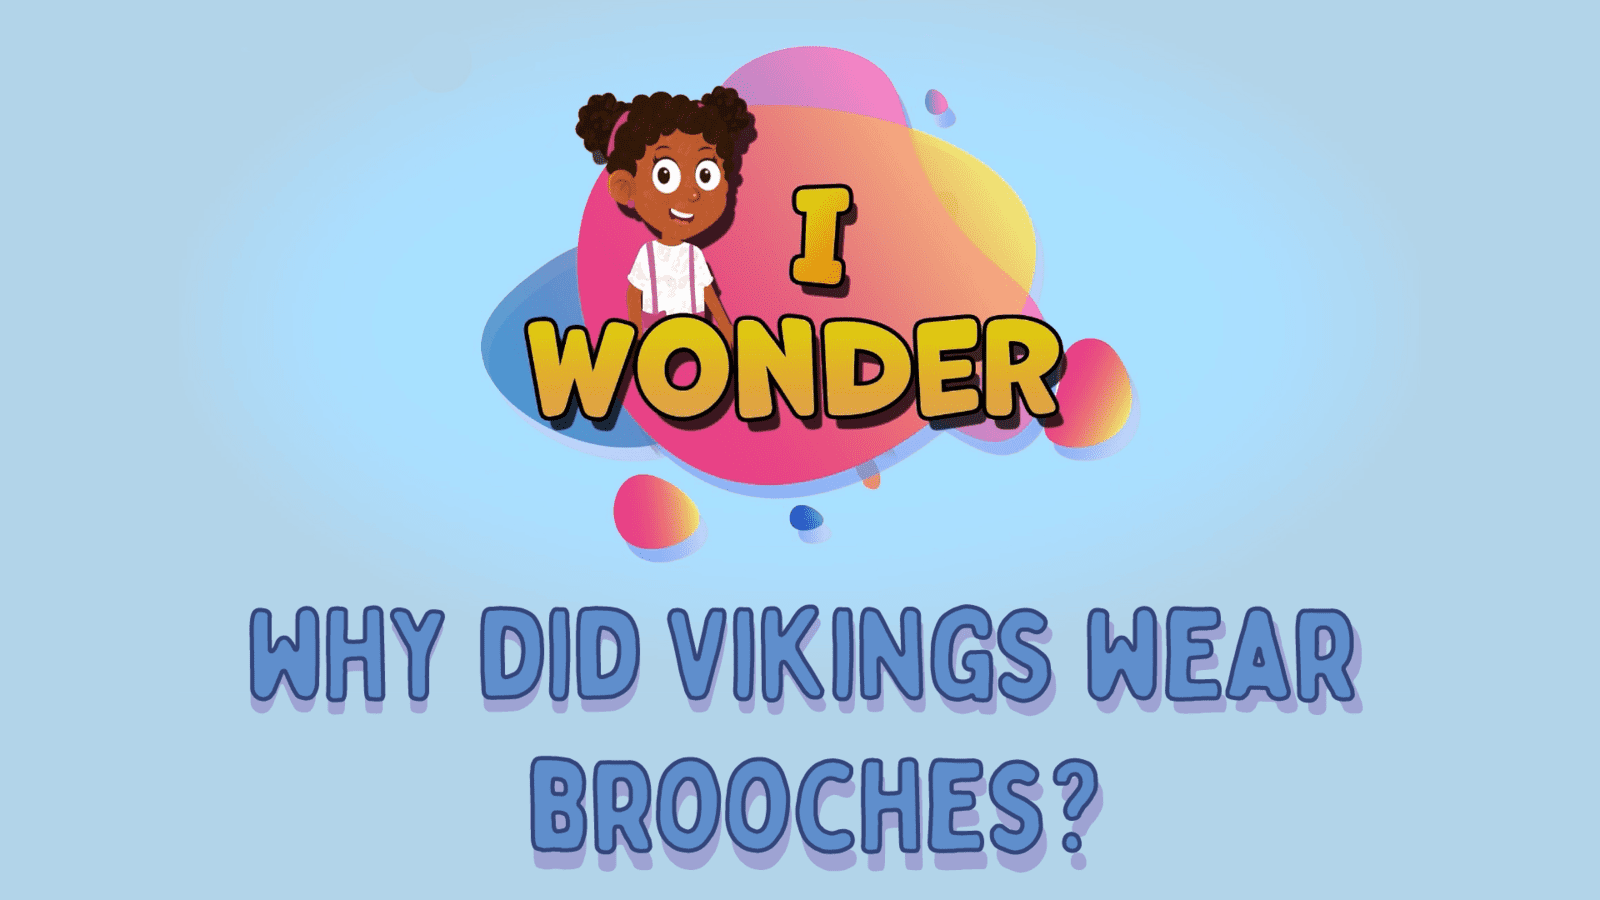 Why Did Vikings Wear Brooches?